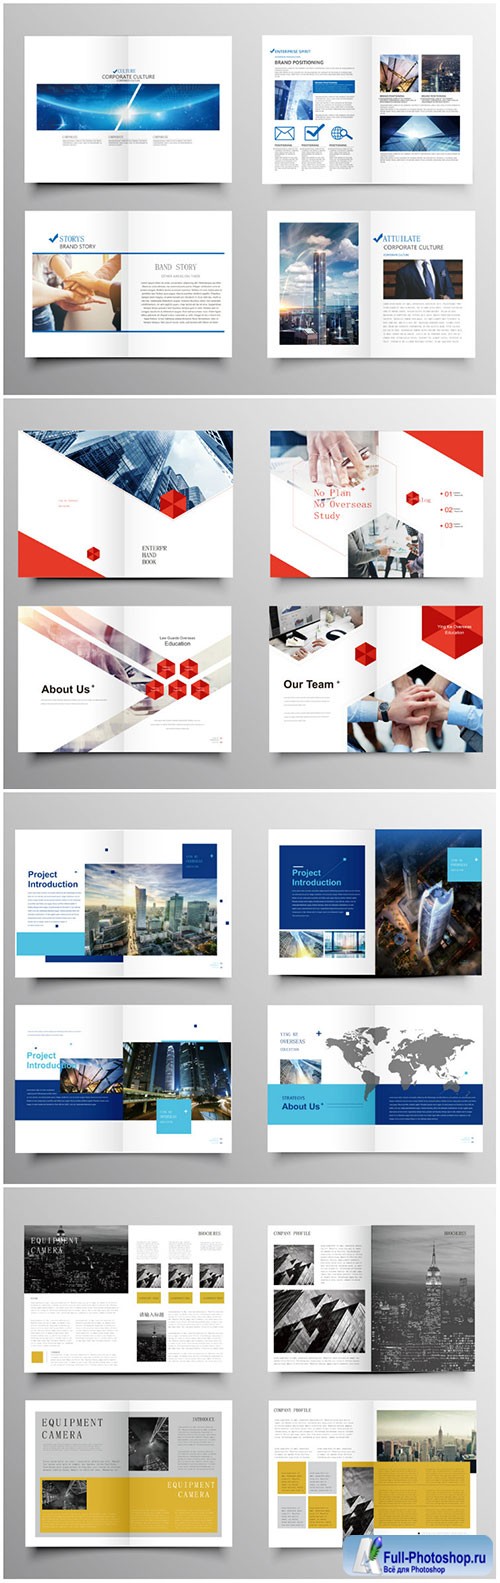 Brochure template vector layout design, corporate business annual report, magazine, flyer mockup # 226